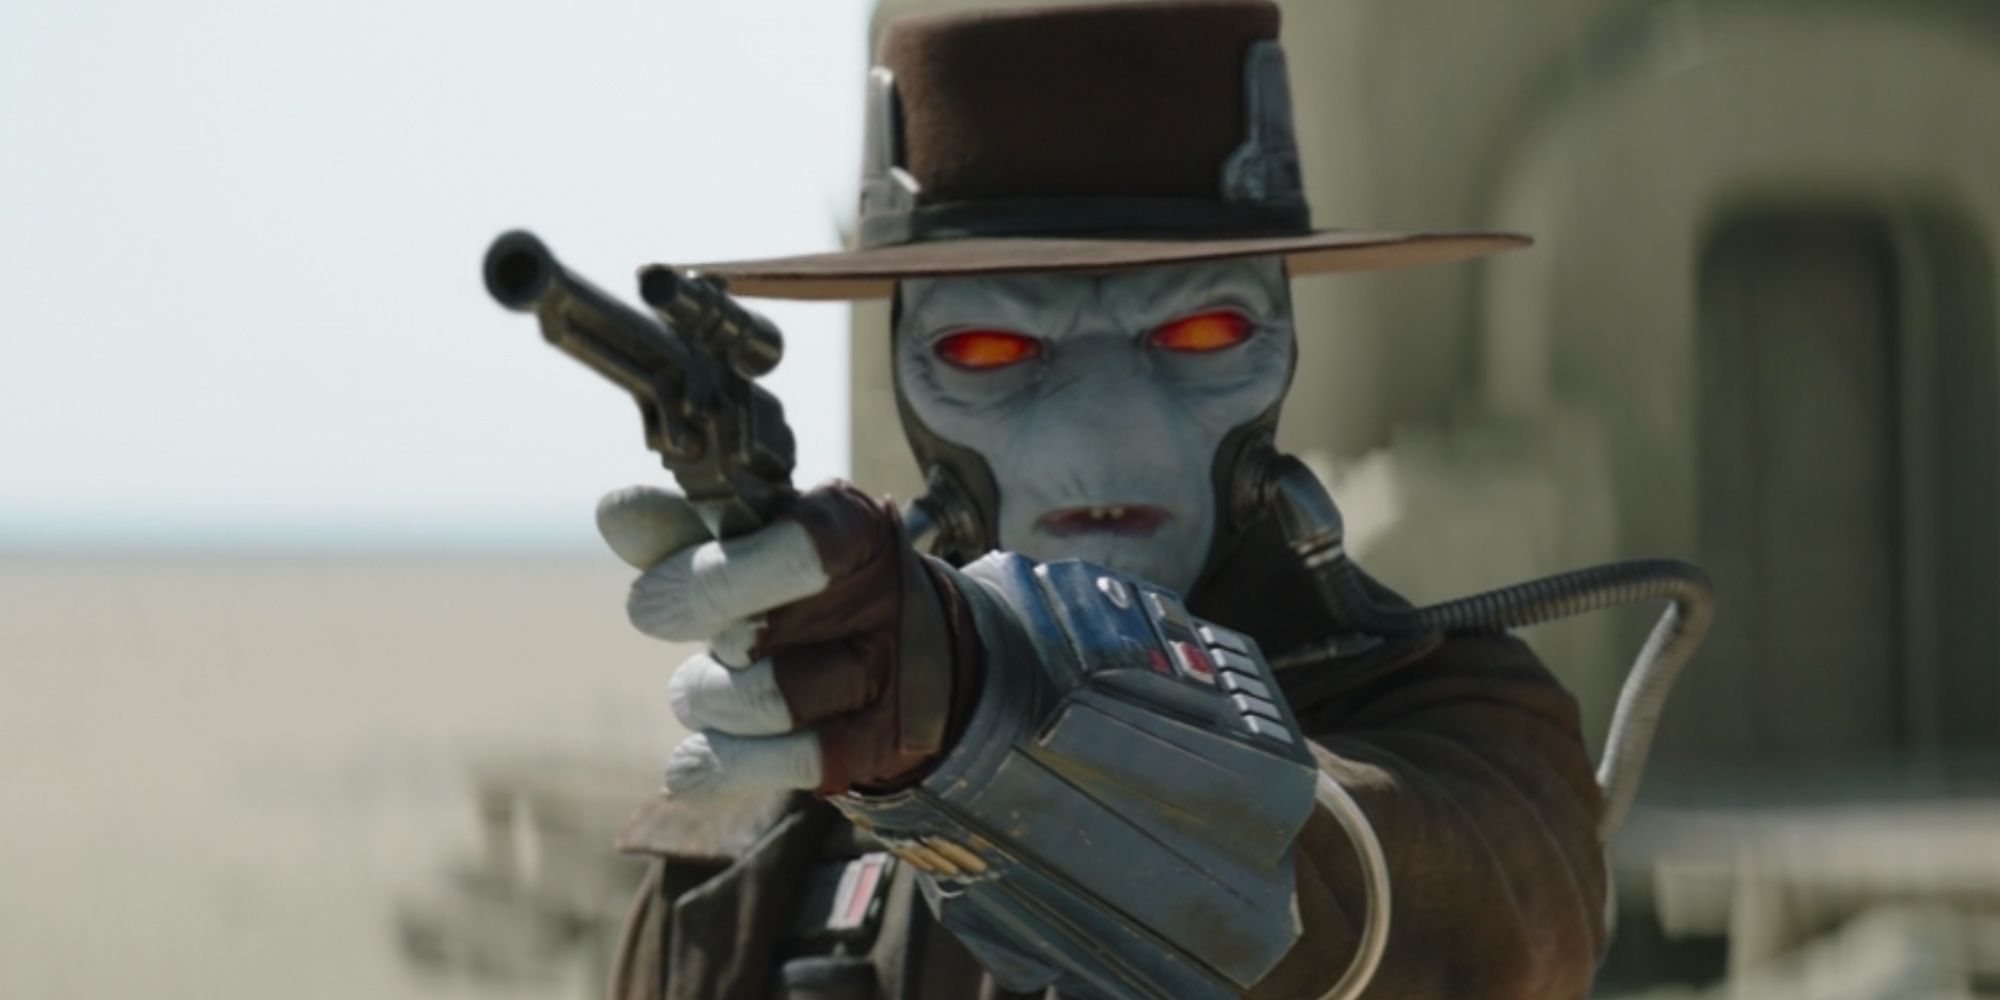 Cad Bane Sets Up Boba Fett’s Cut Clone Wars Story 28 Years Later